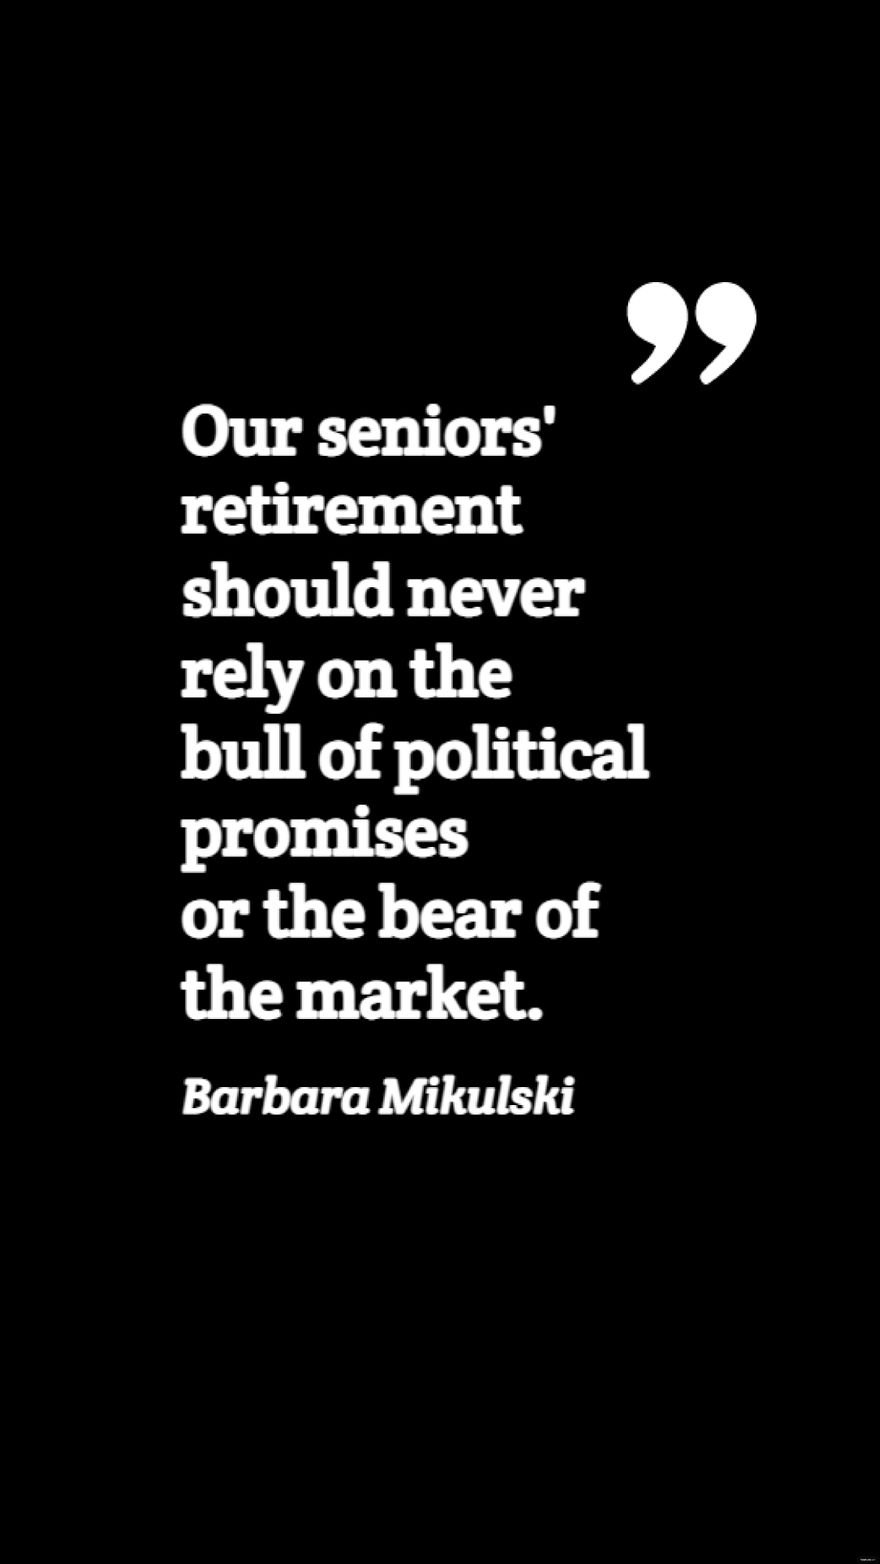 Free Barbara Mikulski - Our seniors' retirement should never rely on the bull of political promises or the bear of the market.